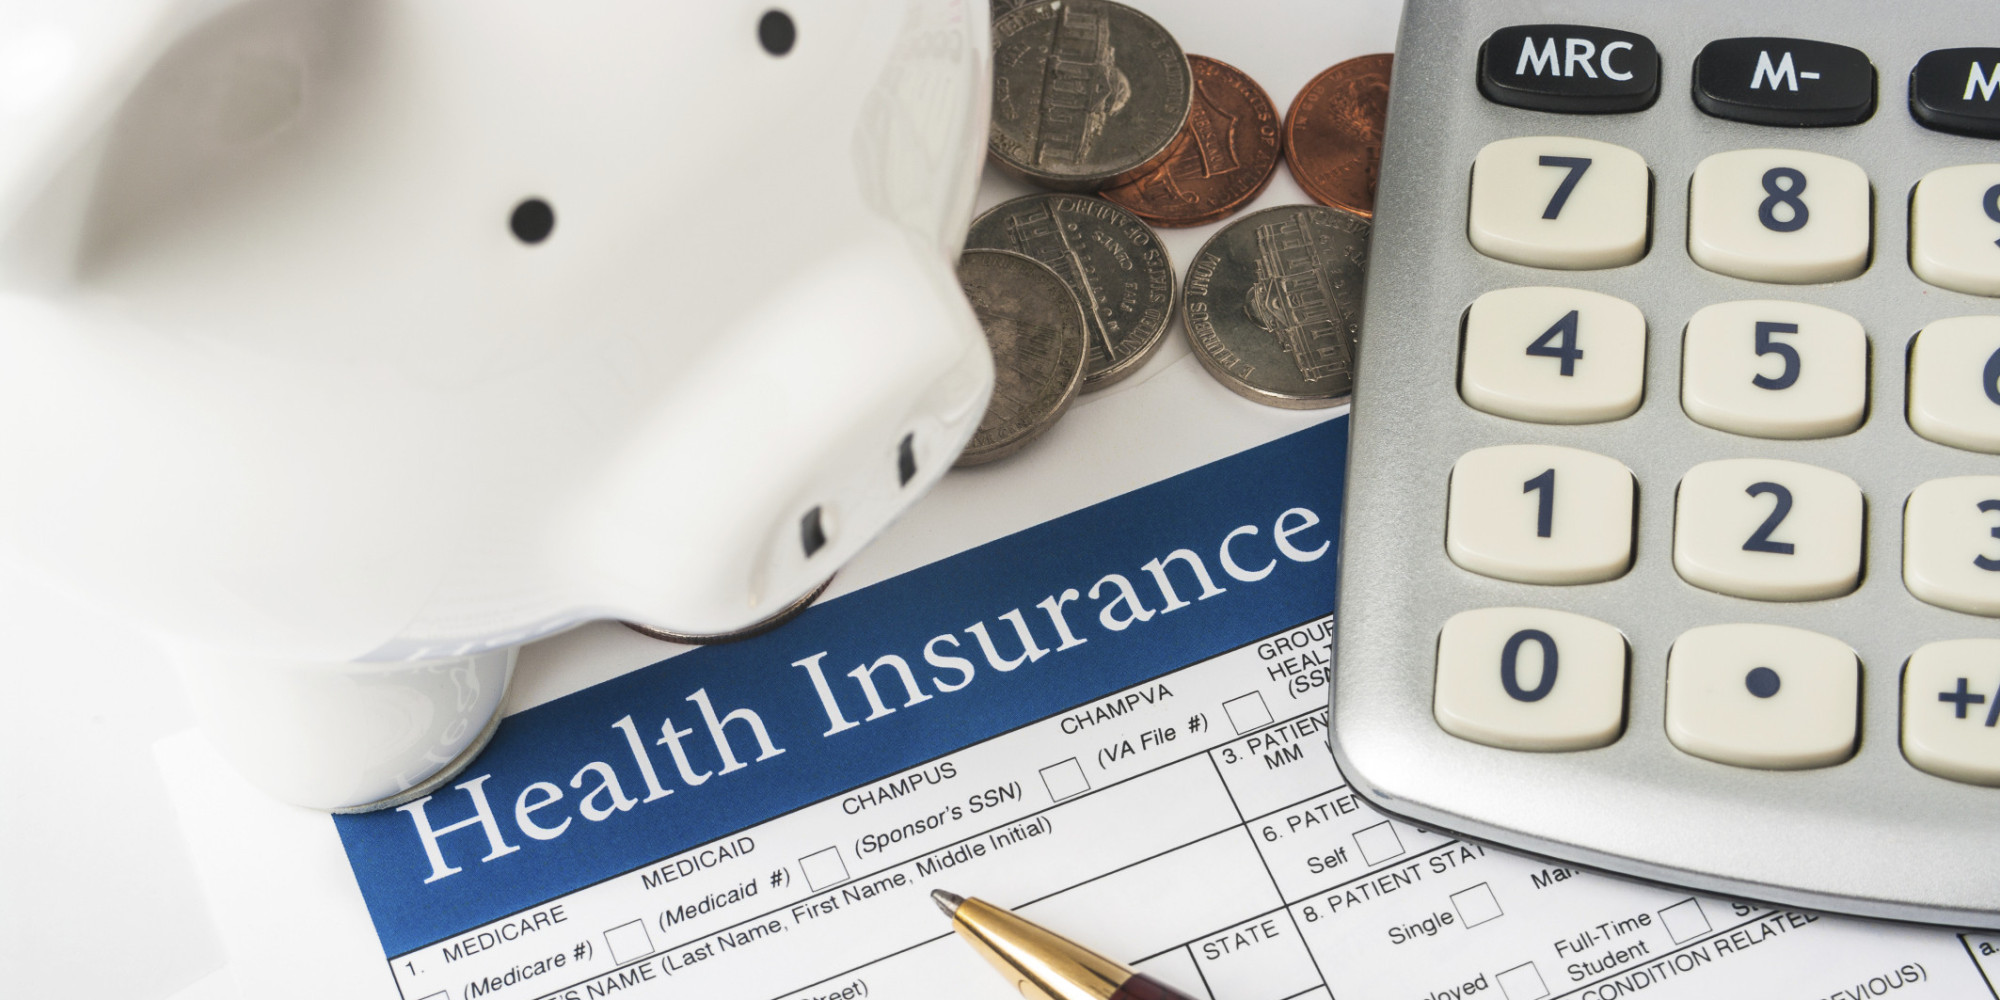 What are the benefits of employee health insurance plans?